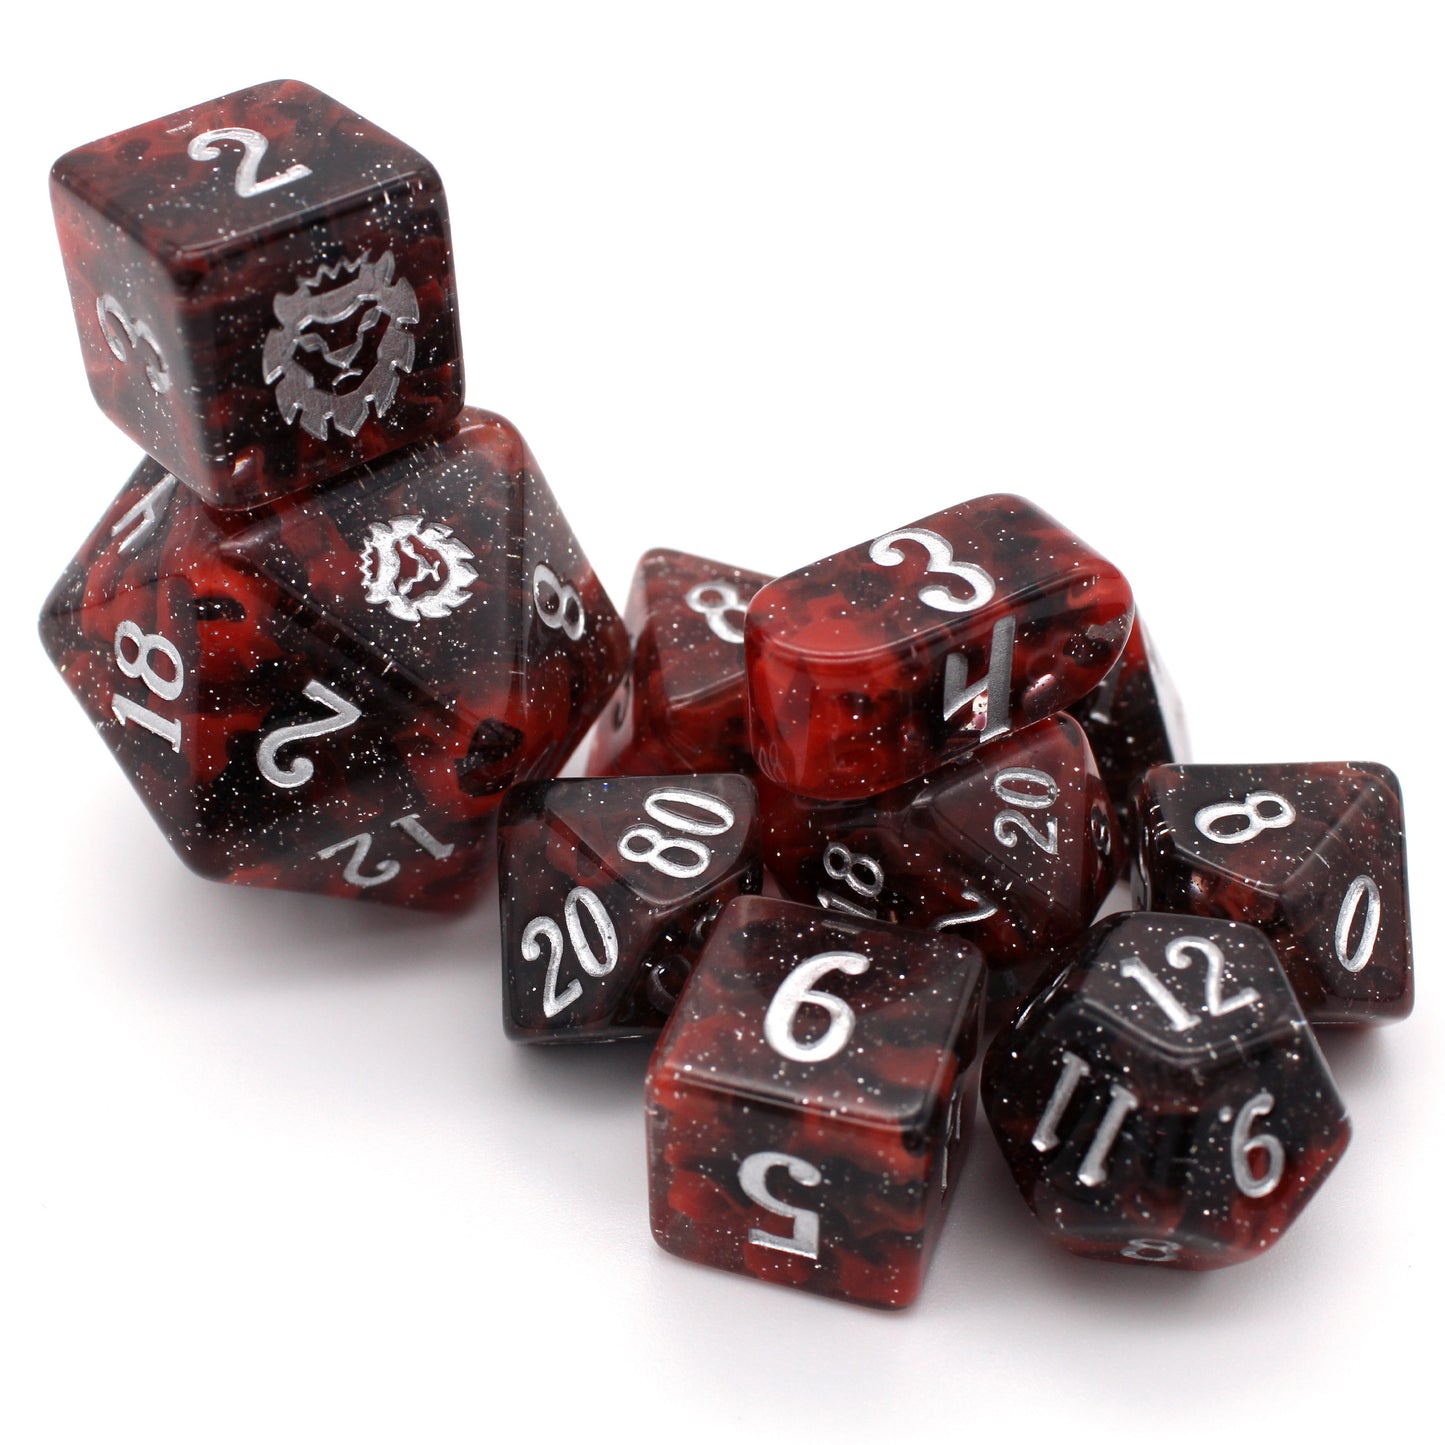 Carina Nebula is a marvel of astronomical beauty with swirls of opaque red and glittery translucent black resin that give amazing depth and unique patterning to each set of silver inked dice!